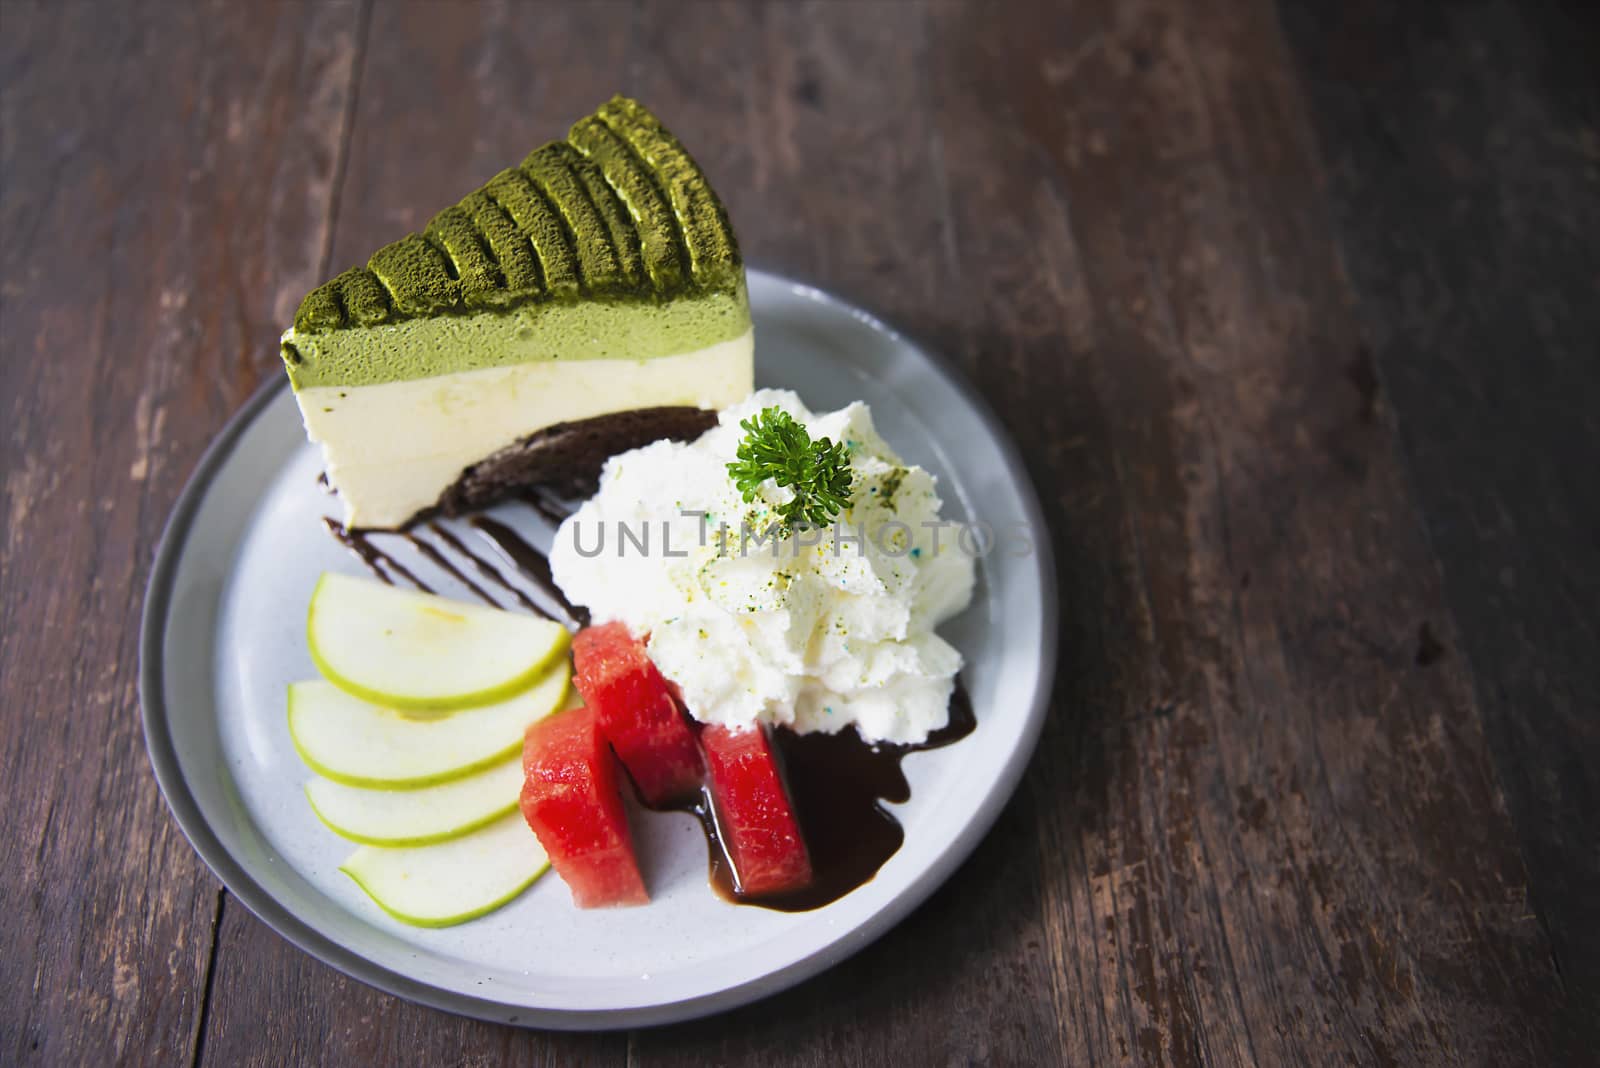 Colorful green tea favor cake with well decorated fruit pieces and whipped cream in white plate - cake recipe menu concept by pairhandmade